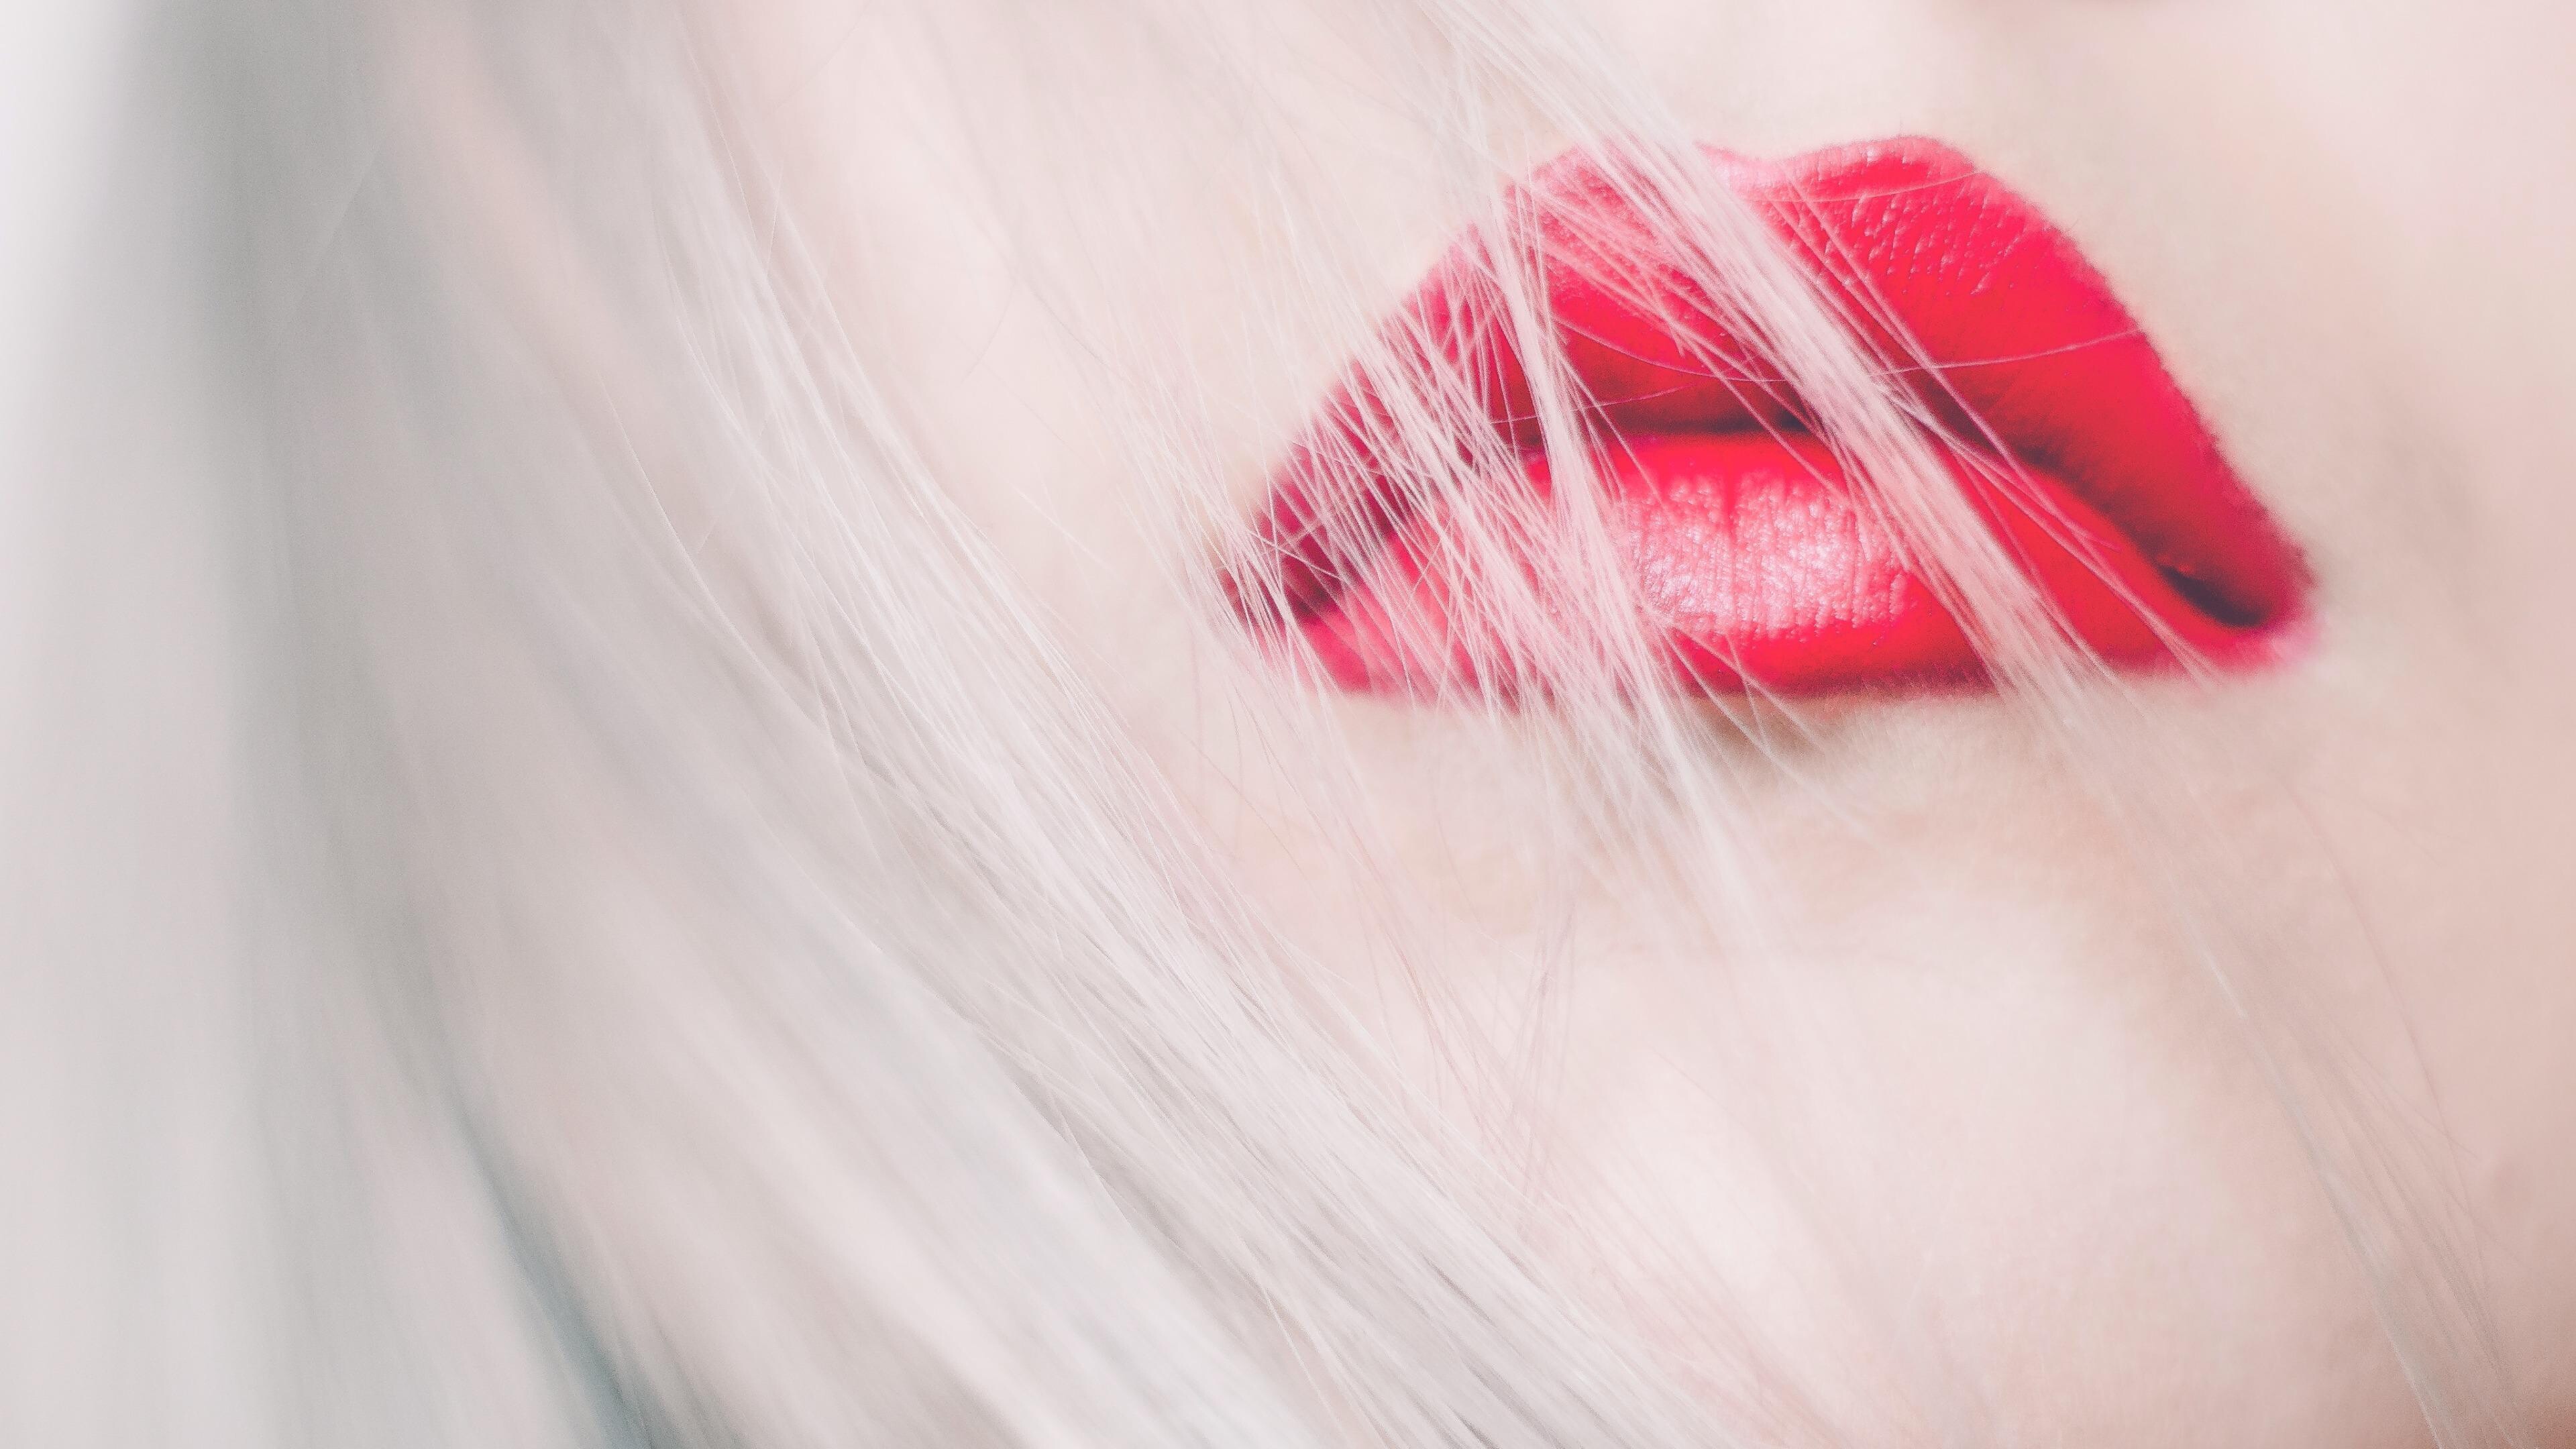 Lipstick: Bright pink lips, The Cupid's bow, A facial feature, The double curve of a human upper lip. 3840x2160 4K Wallpaper.